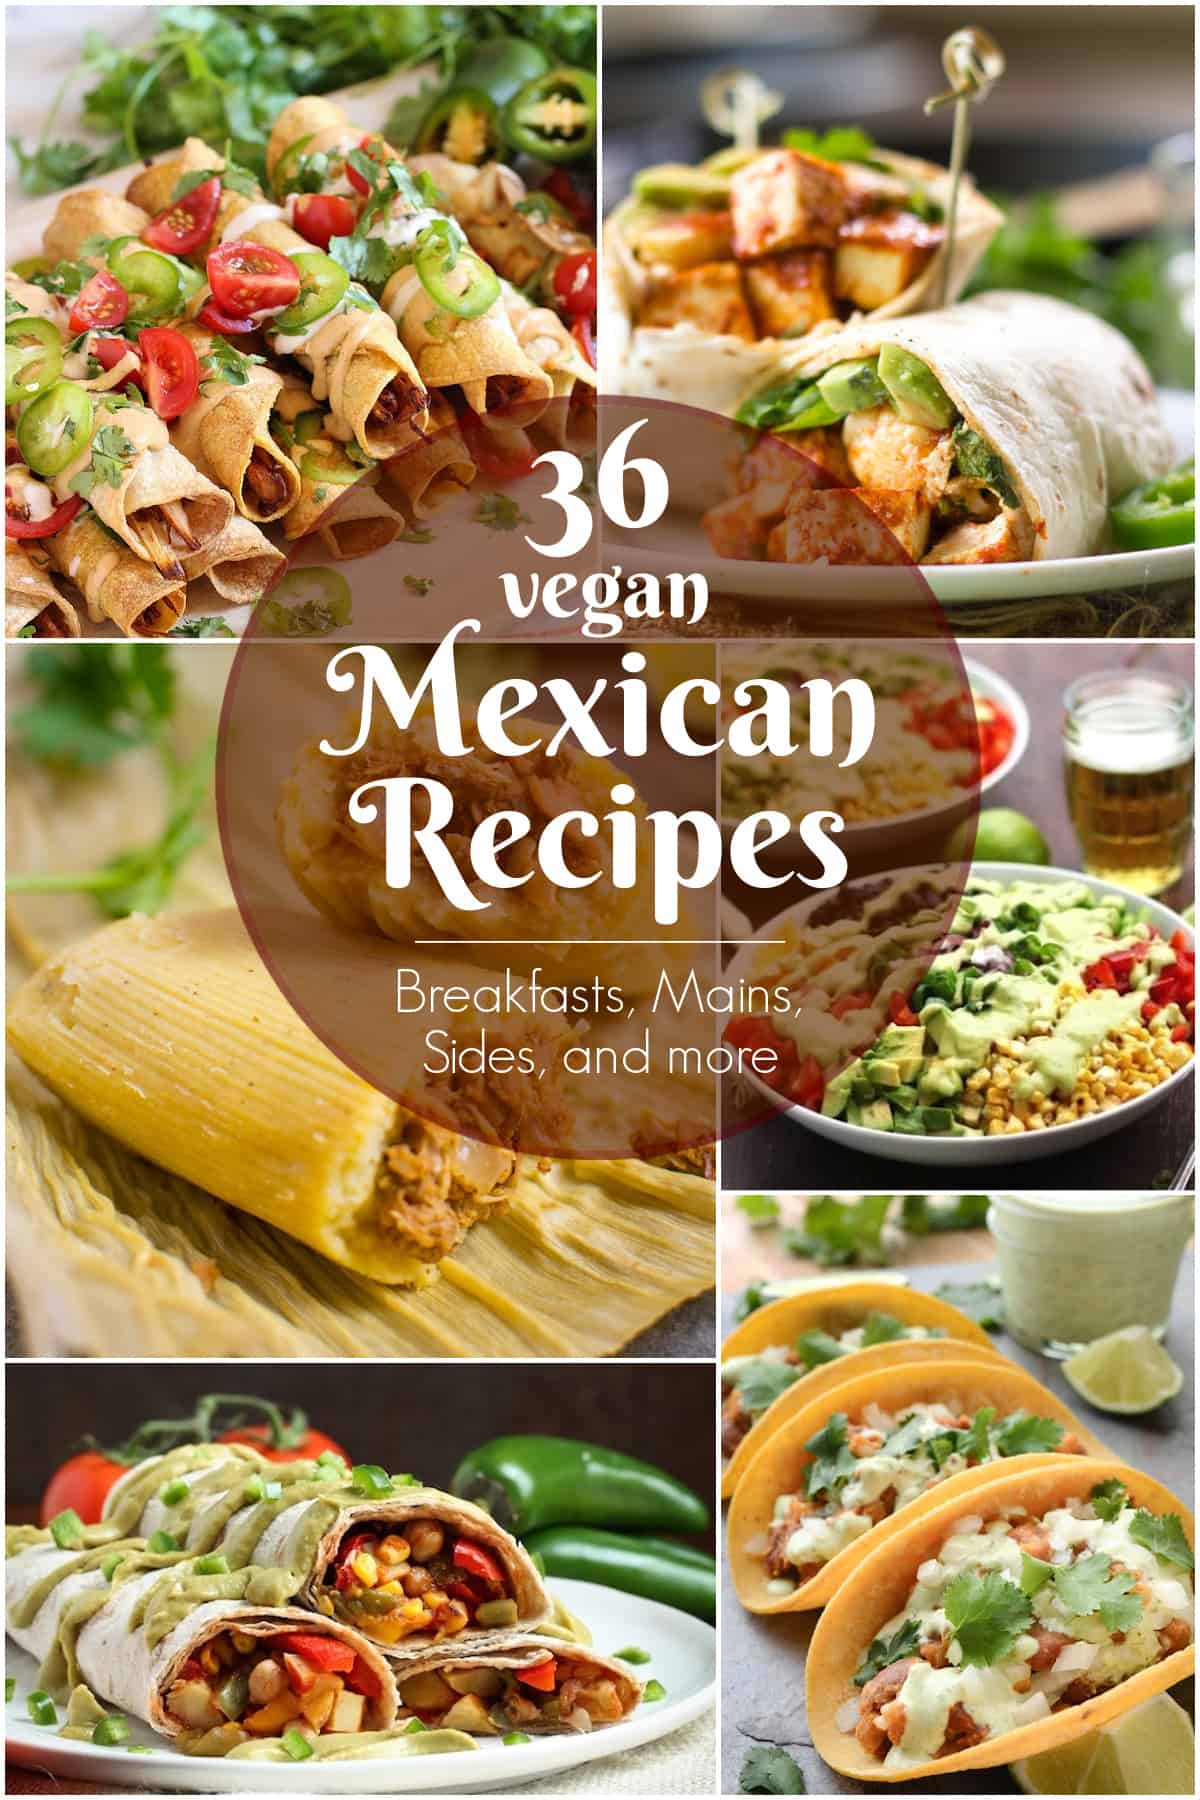 A collage of vegan Mexican food including tacos, tamales, salad, burrito and taquitos..